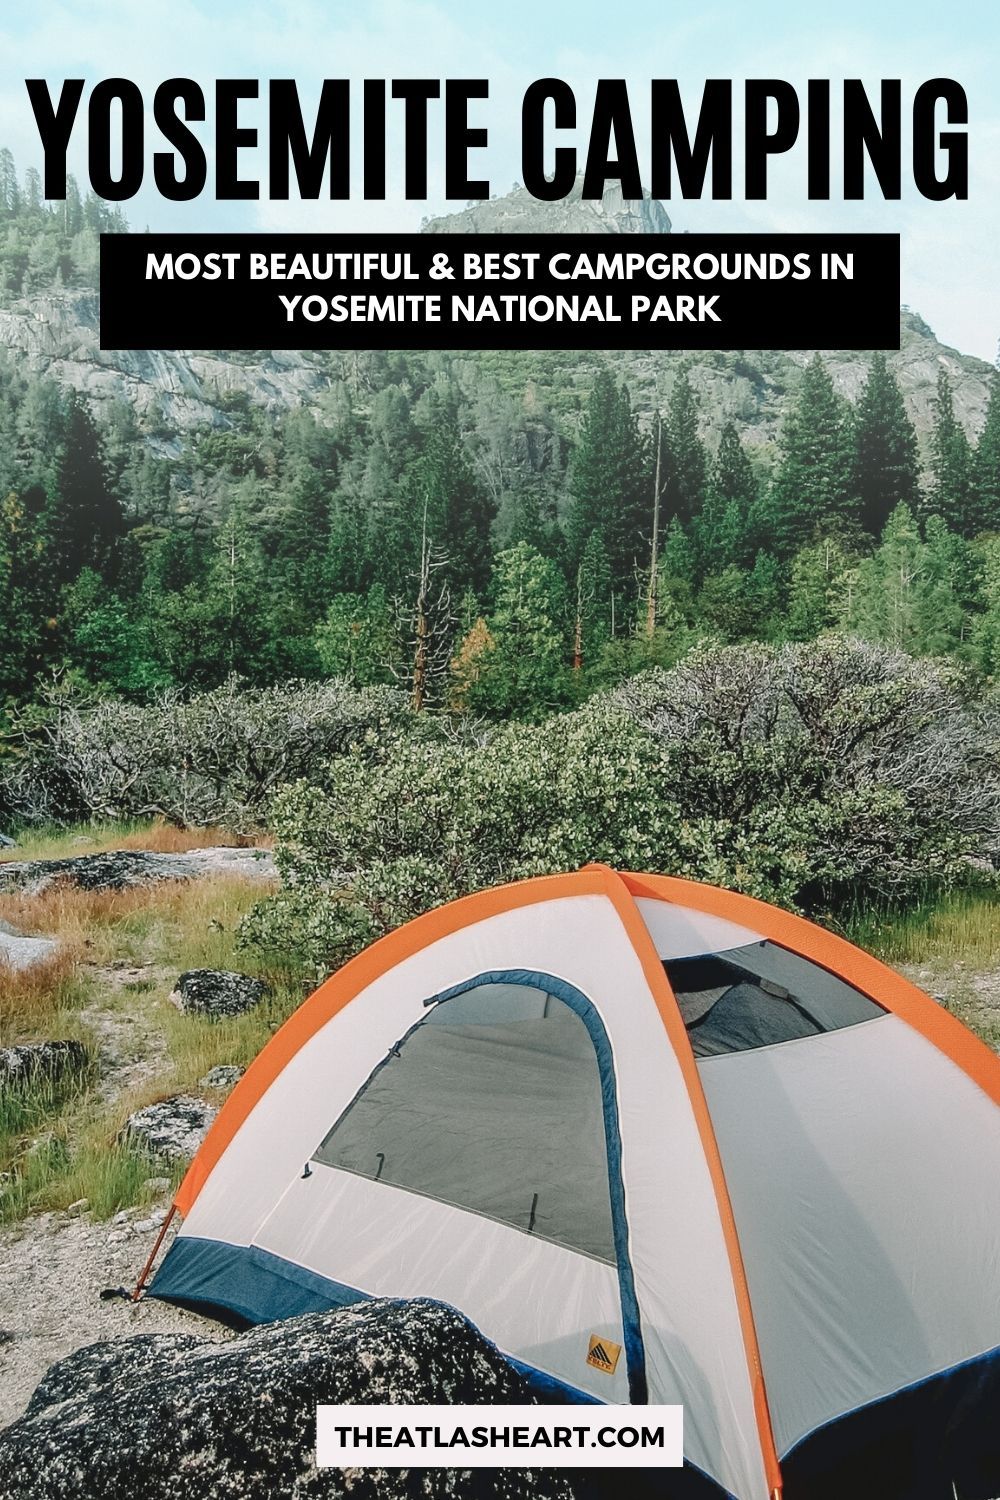 Yosemite Camping: Most Beautiful & Best Campgrounds in Yosemite National Park